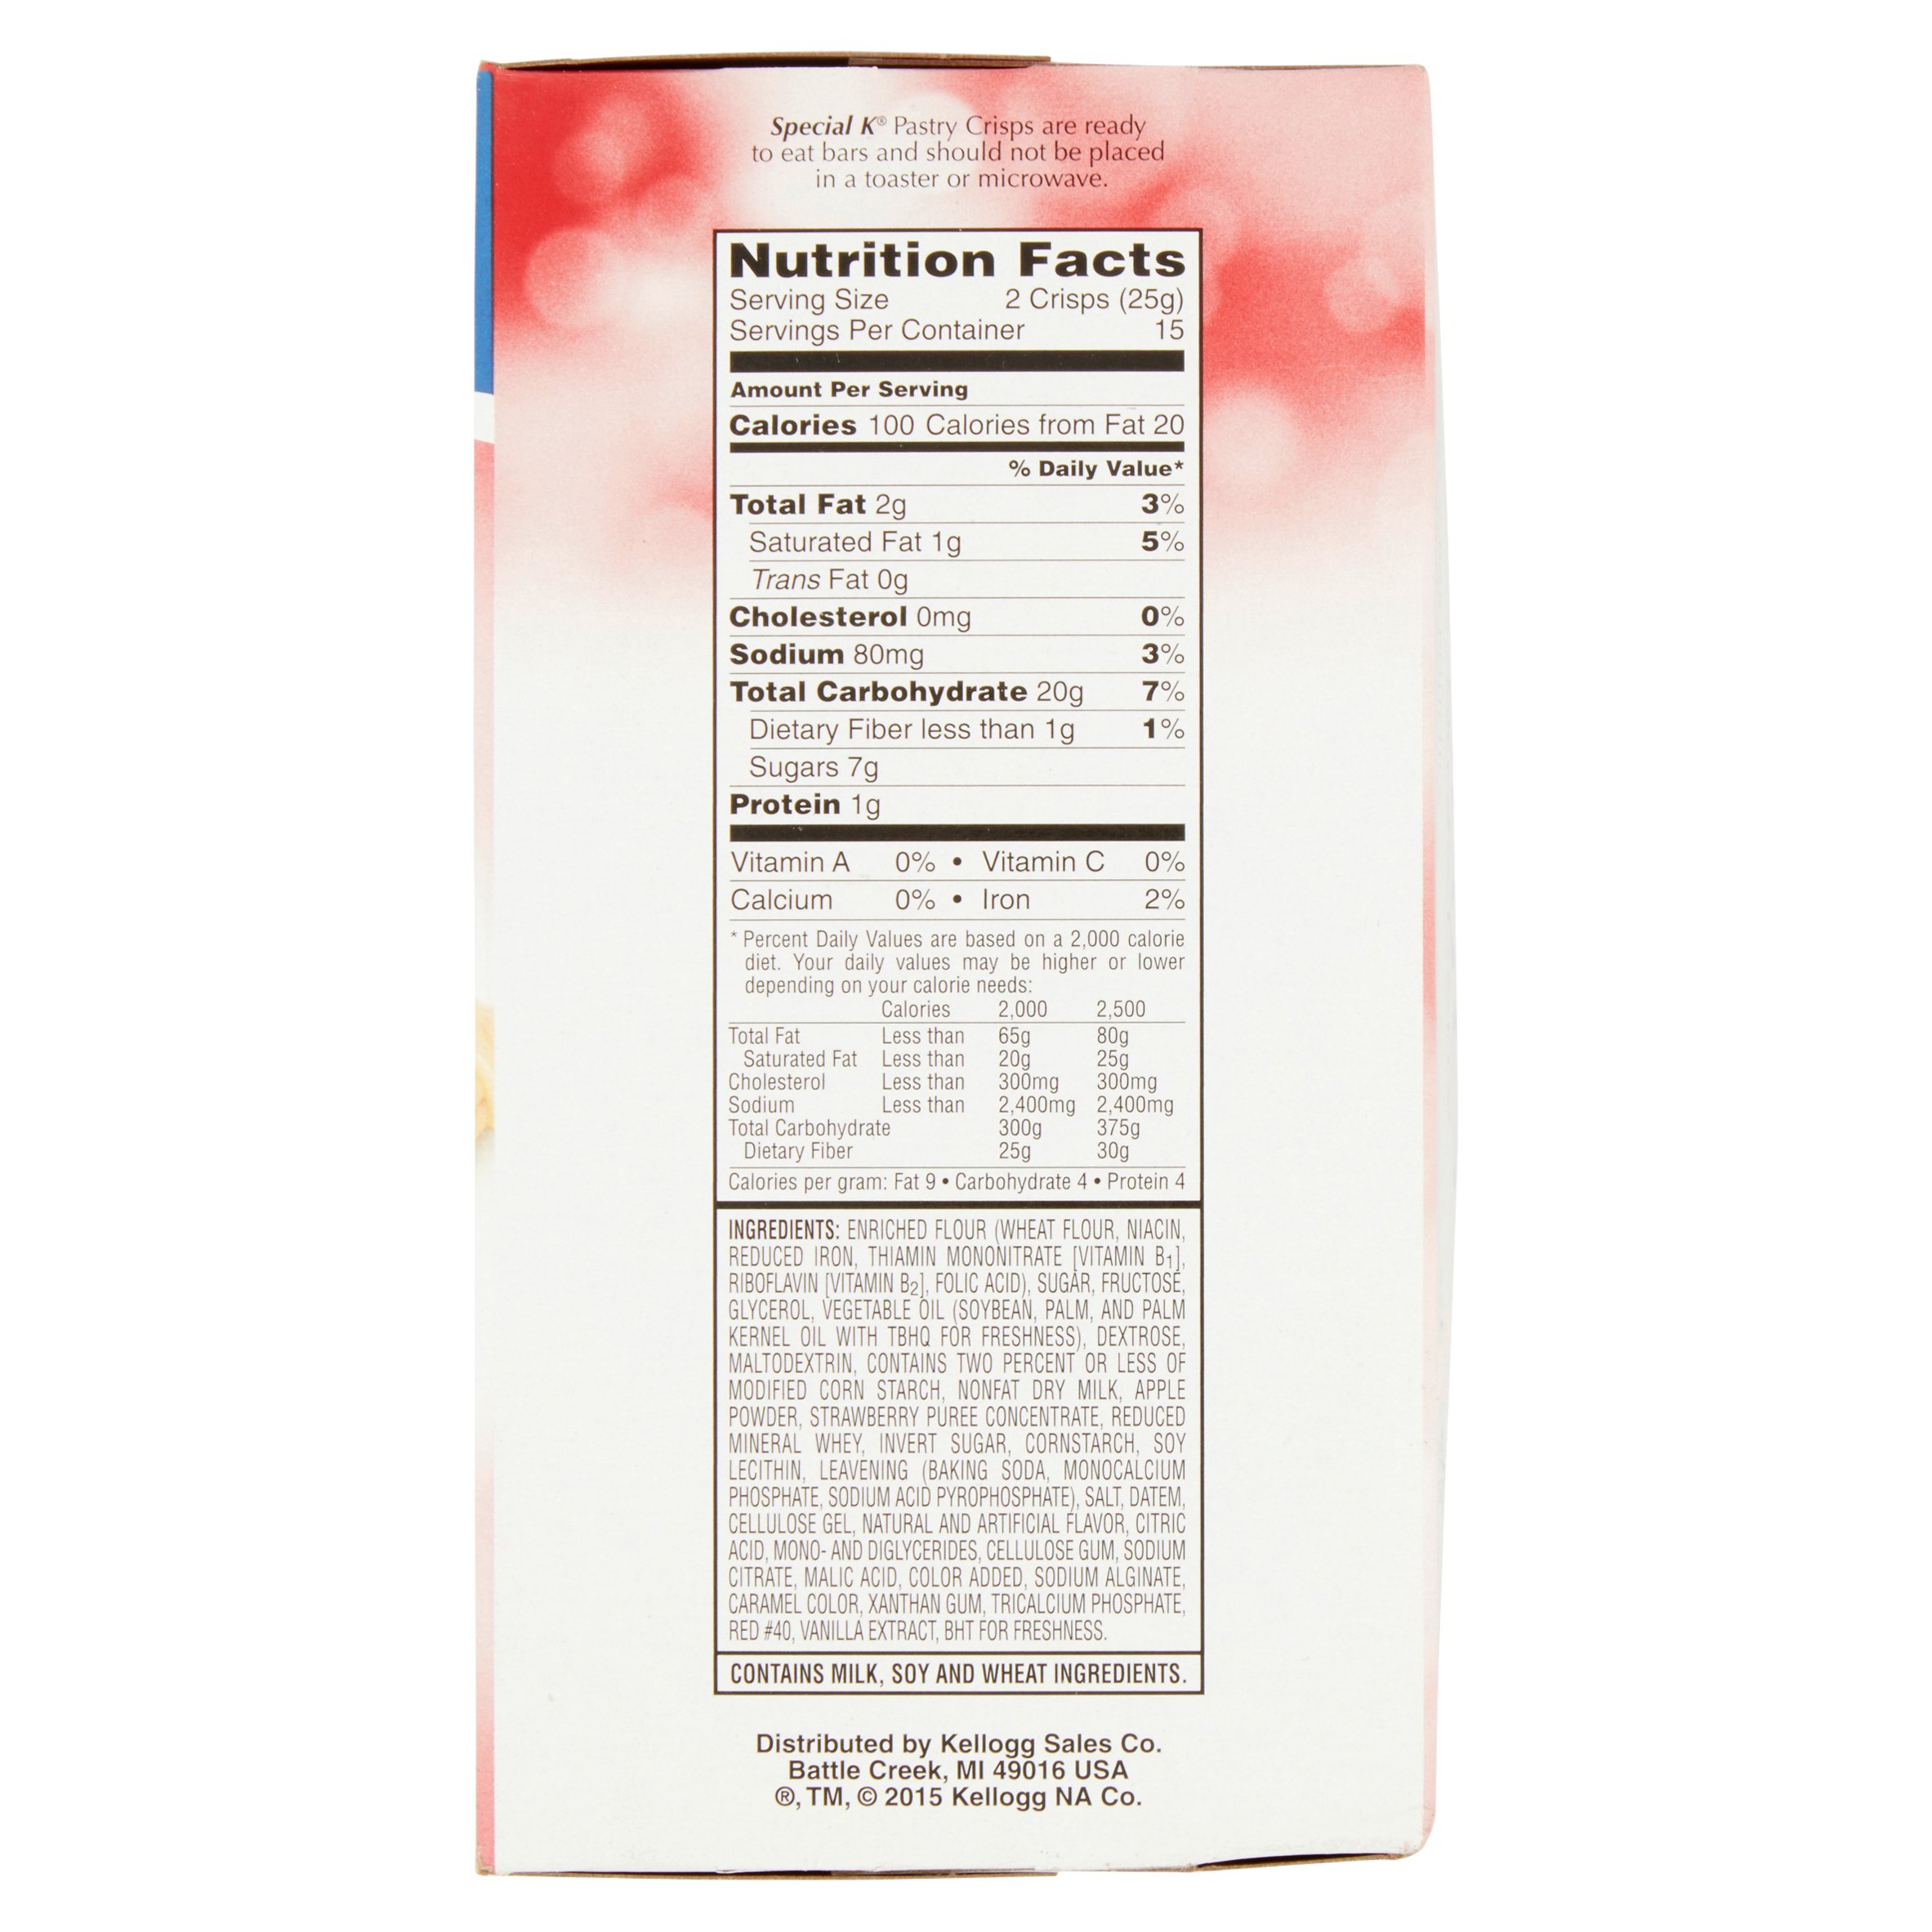 Kellogg's Special K Strawberry Pastry Crisps, 0.88 oz, 15 count - image 5 of 5